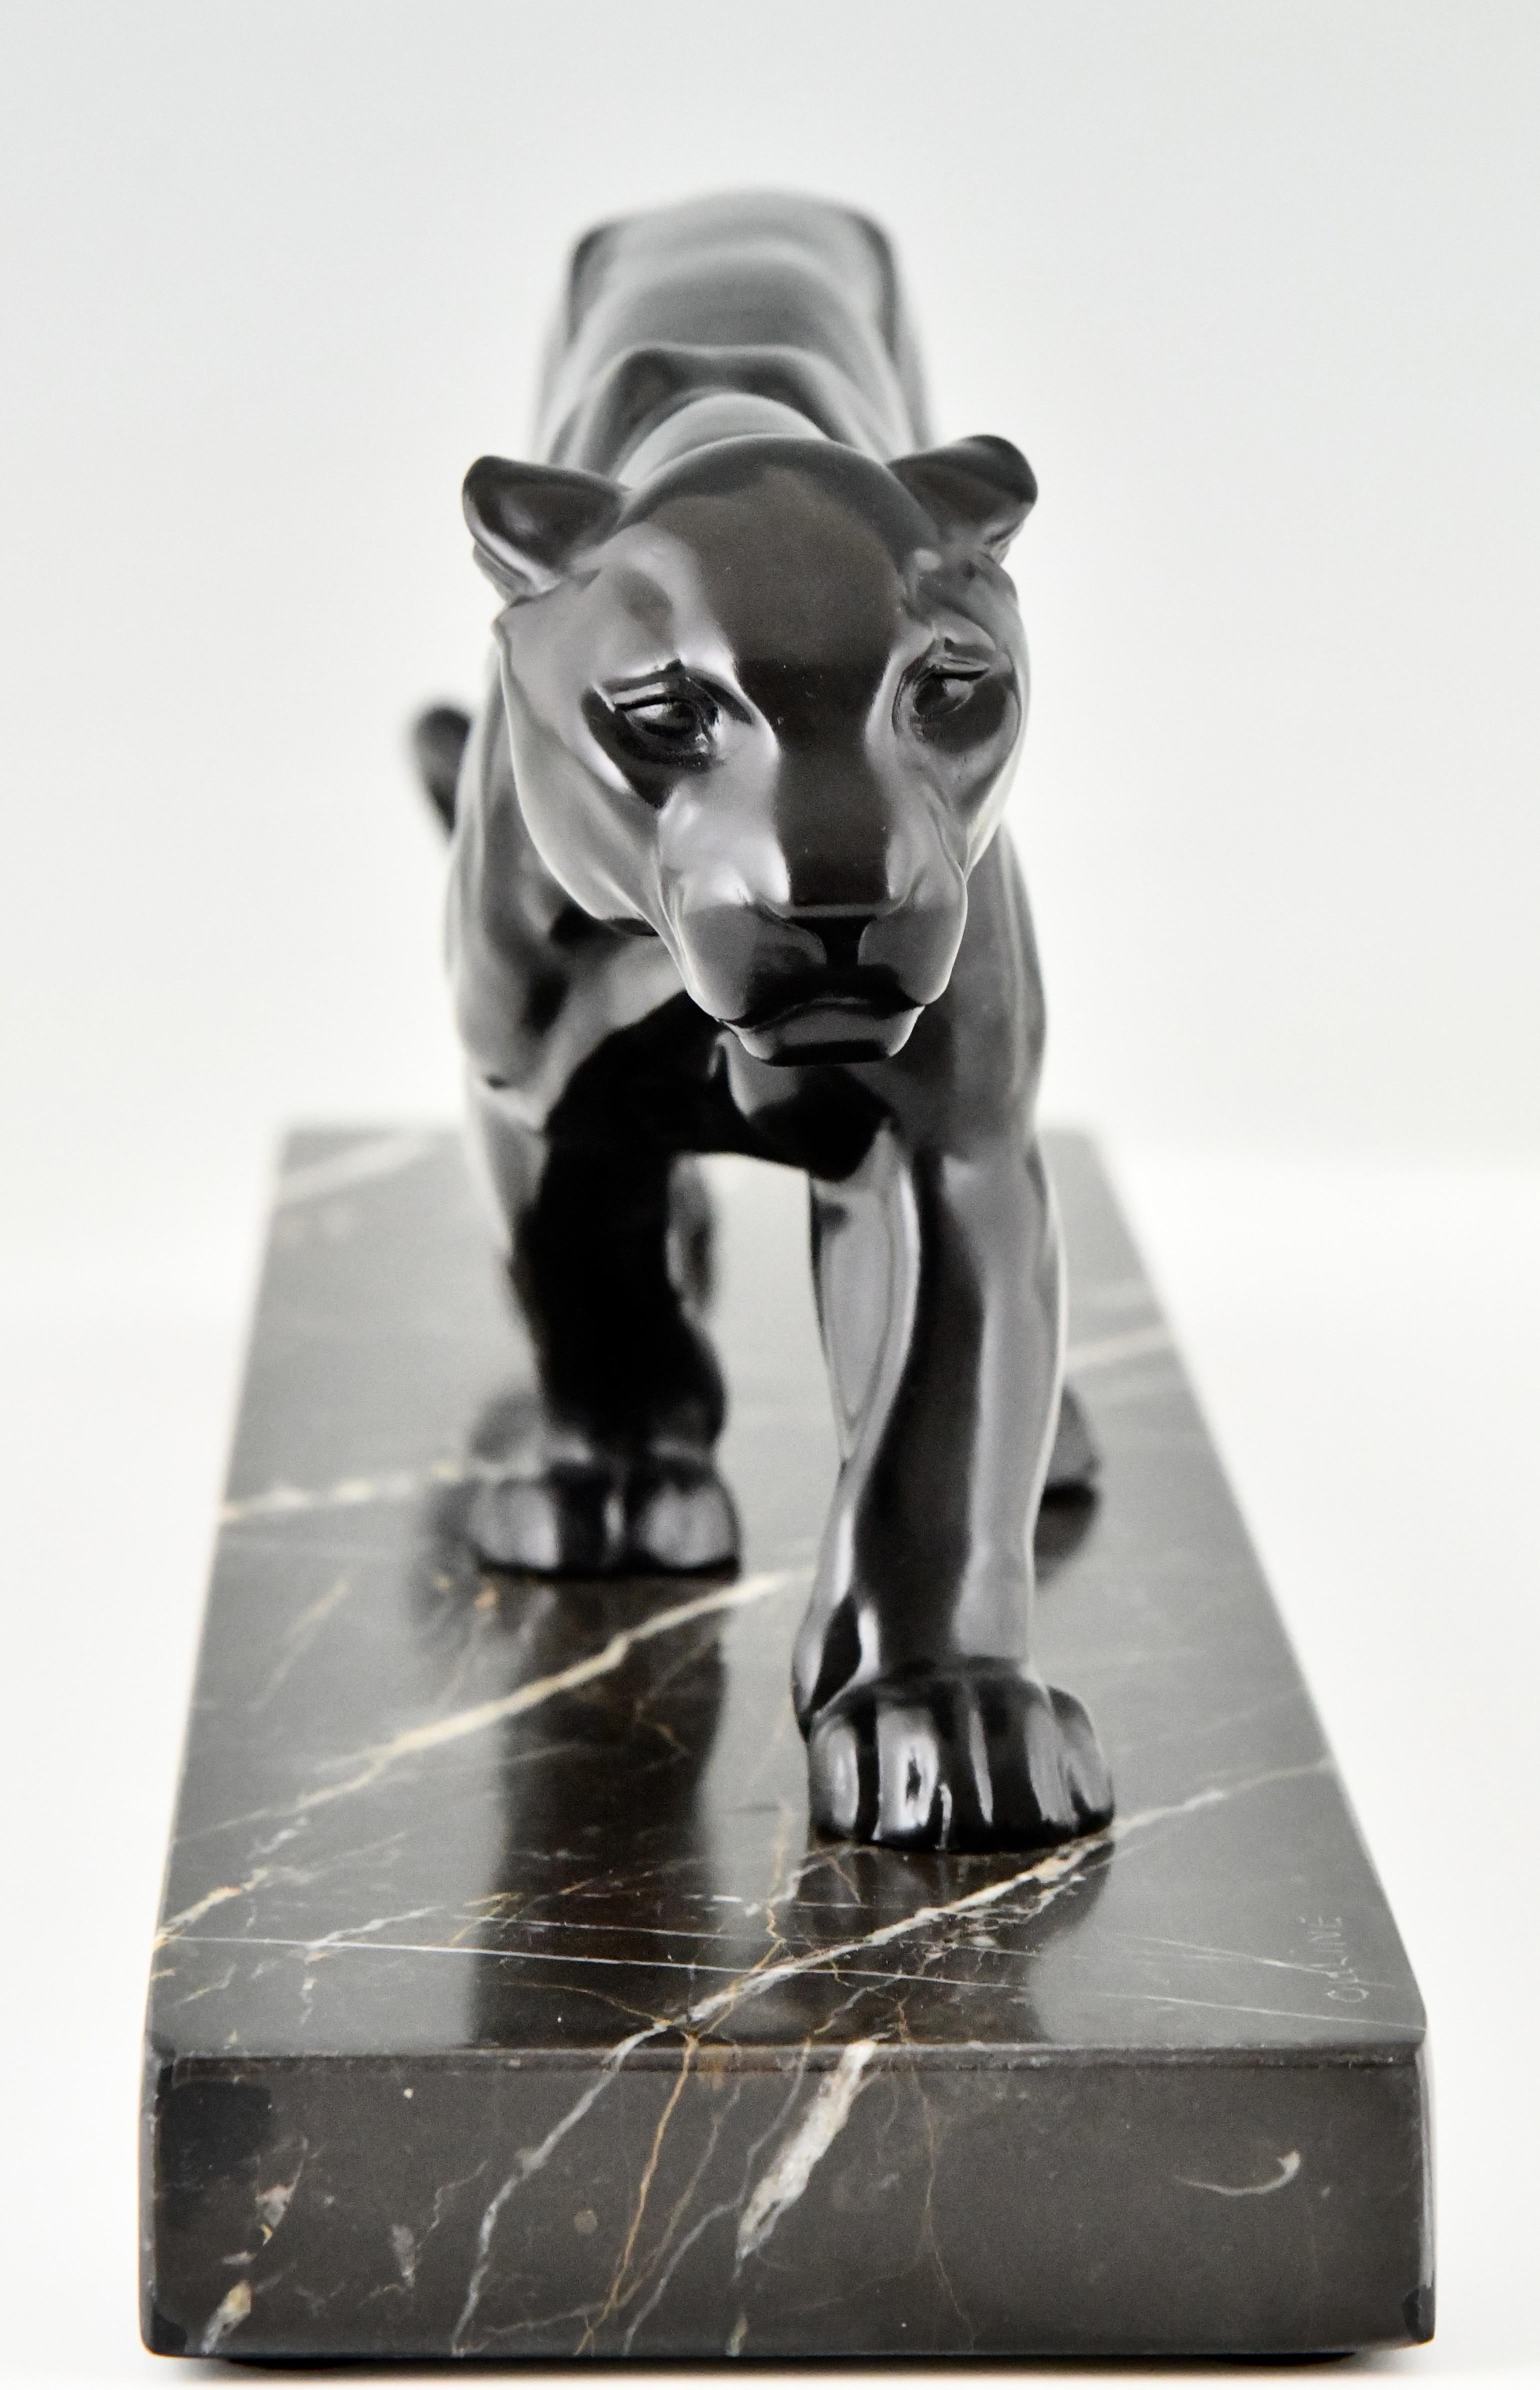 Metal Art Deco panther sculpture by Alexandre Ouline